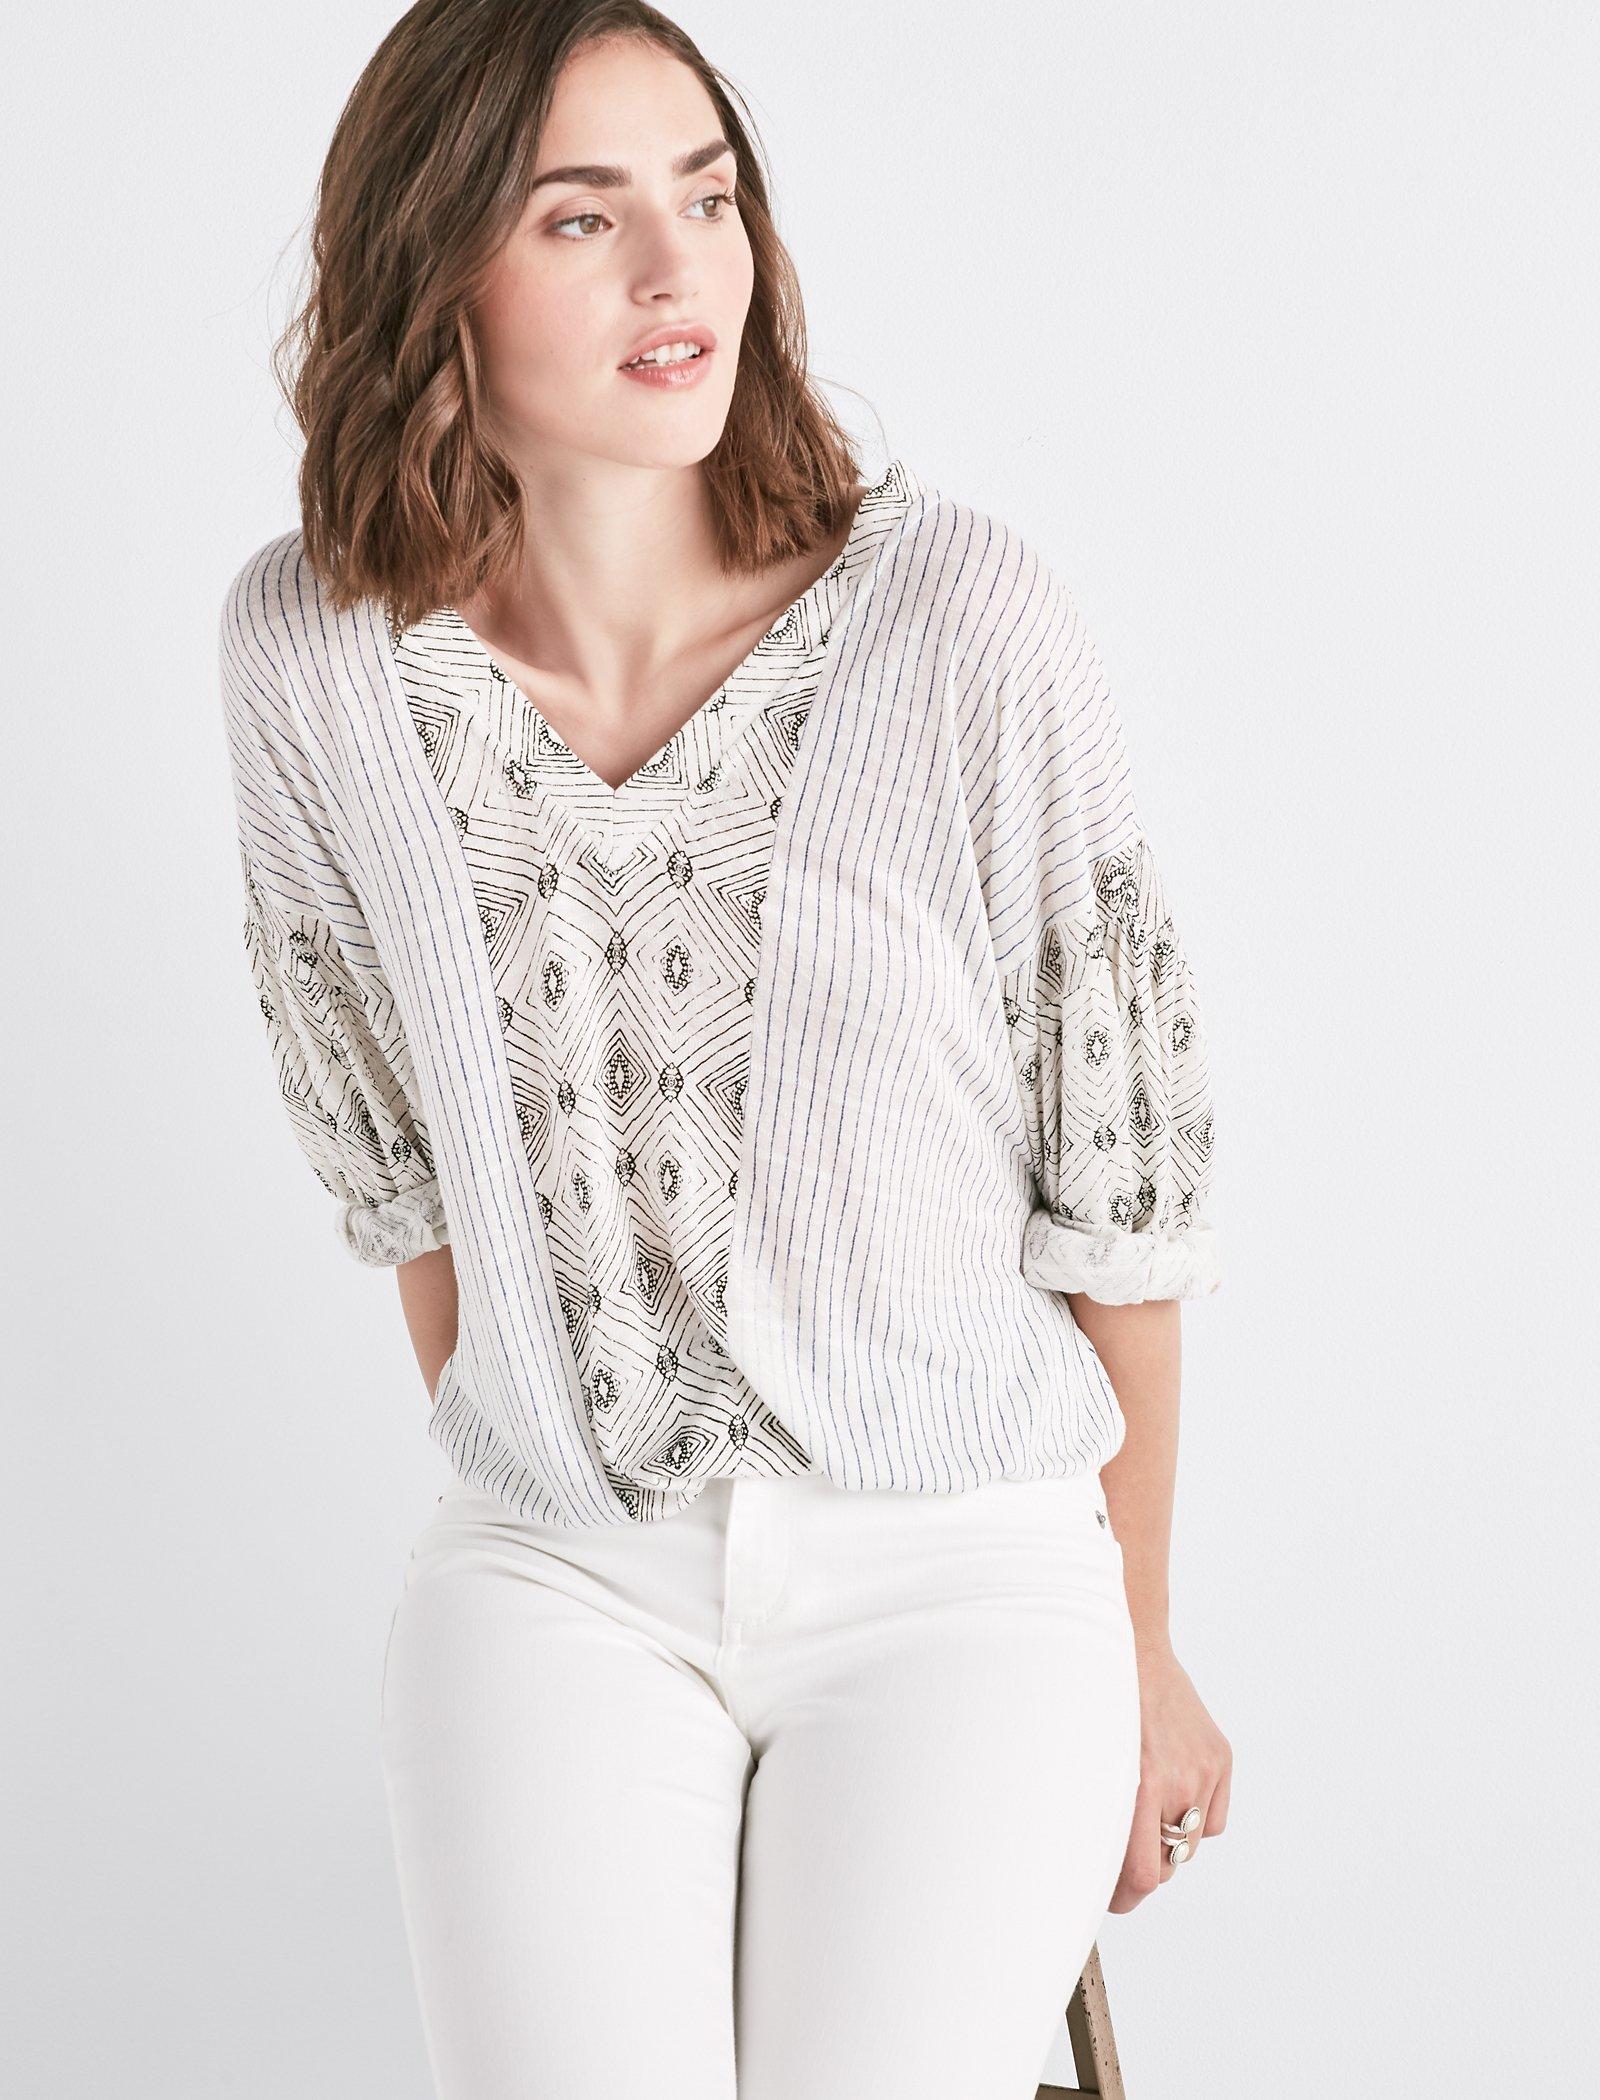 TEXTURE BANDED BOTTOM PEASANT TOP